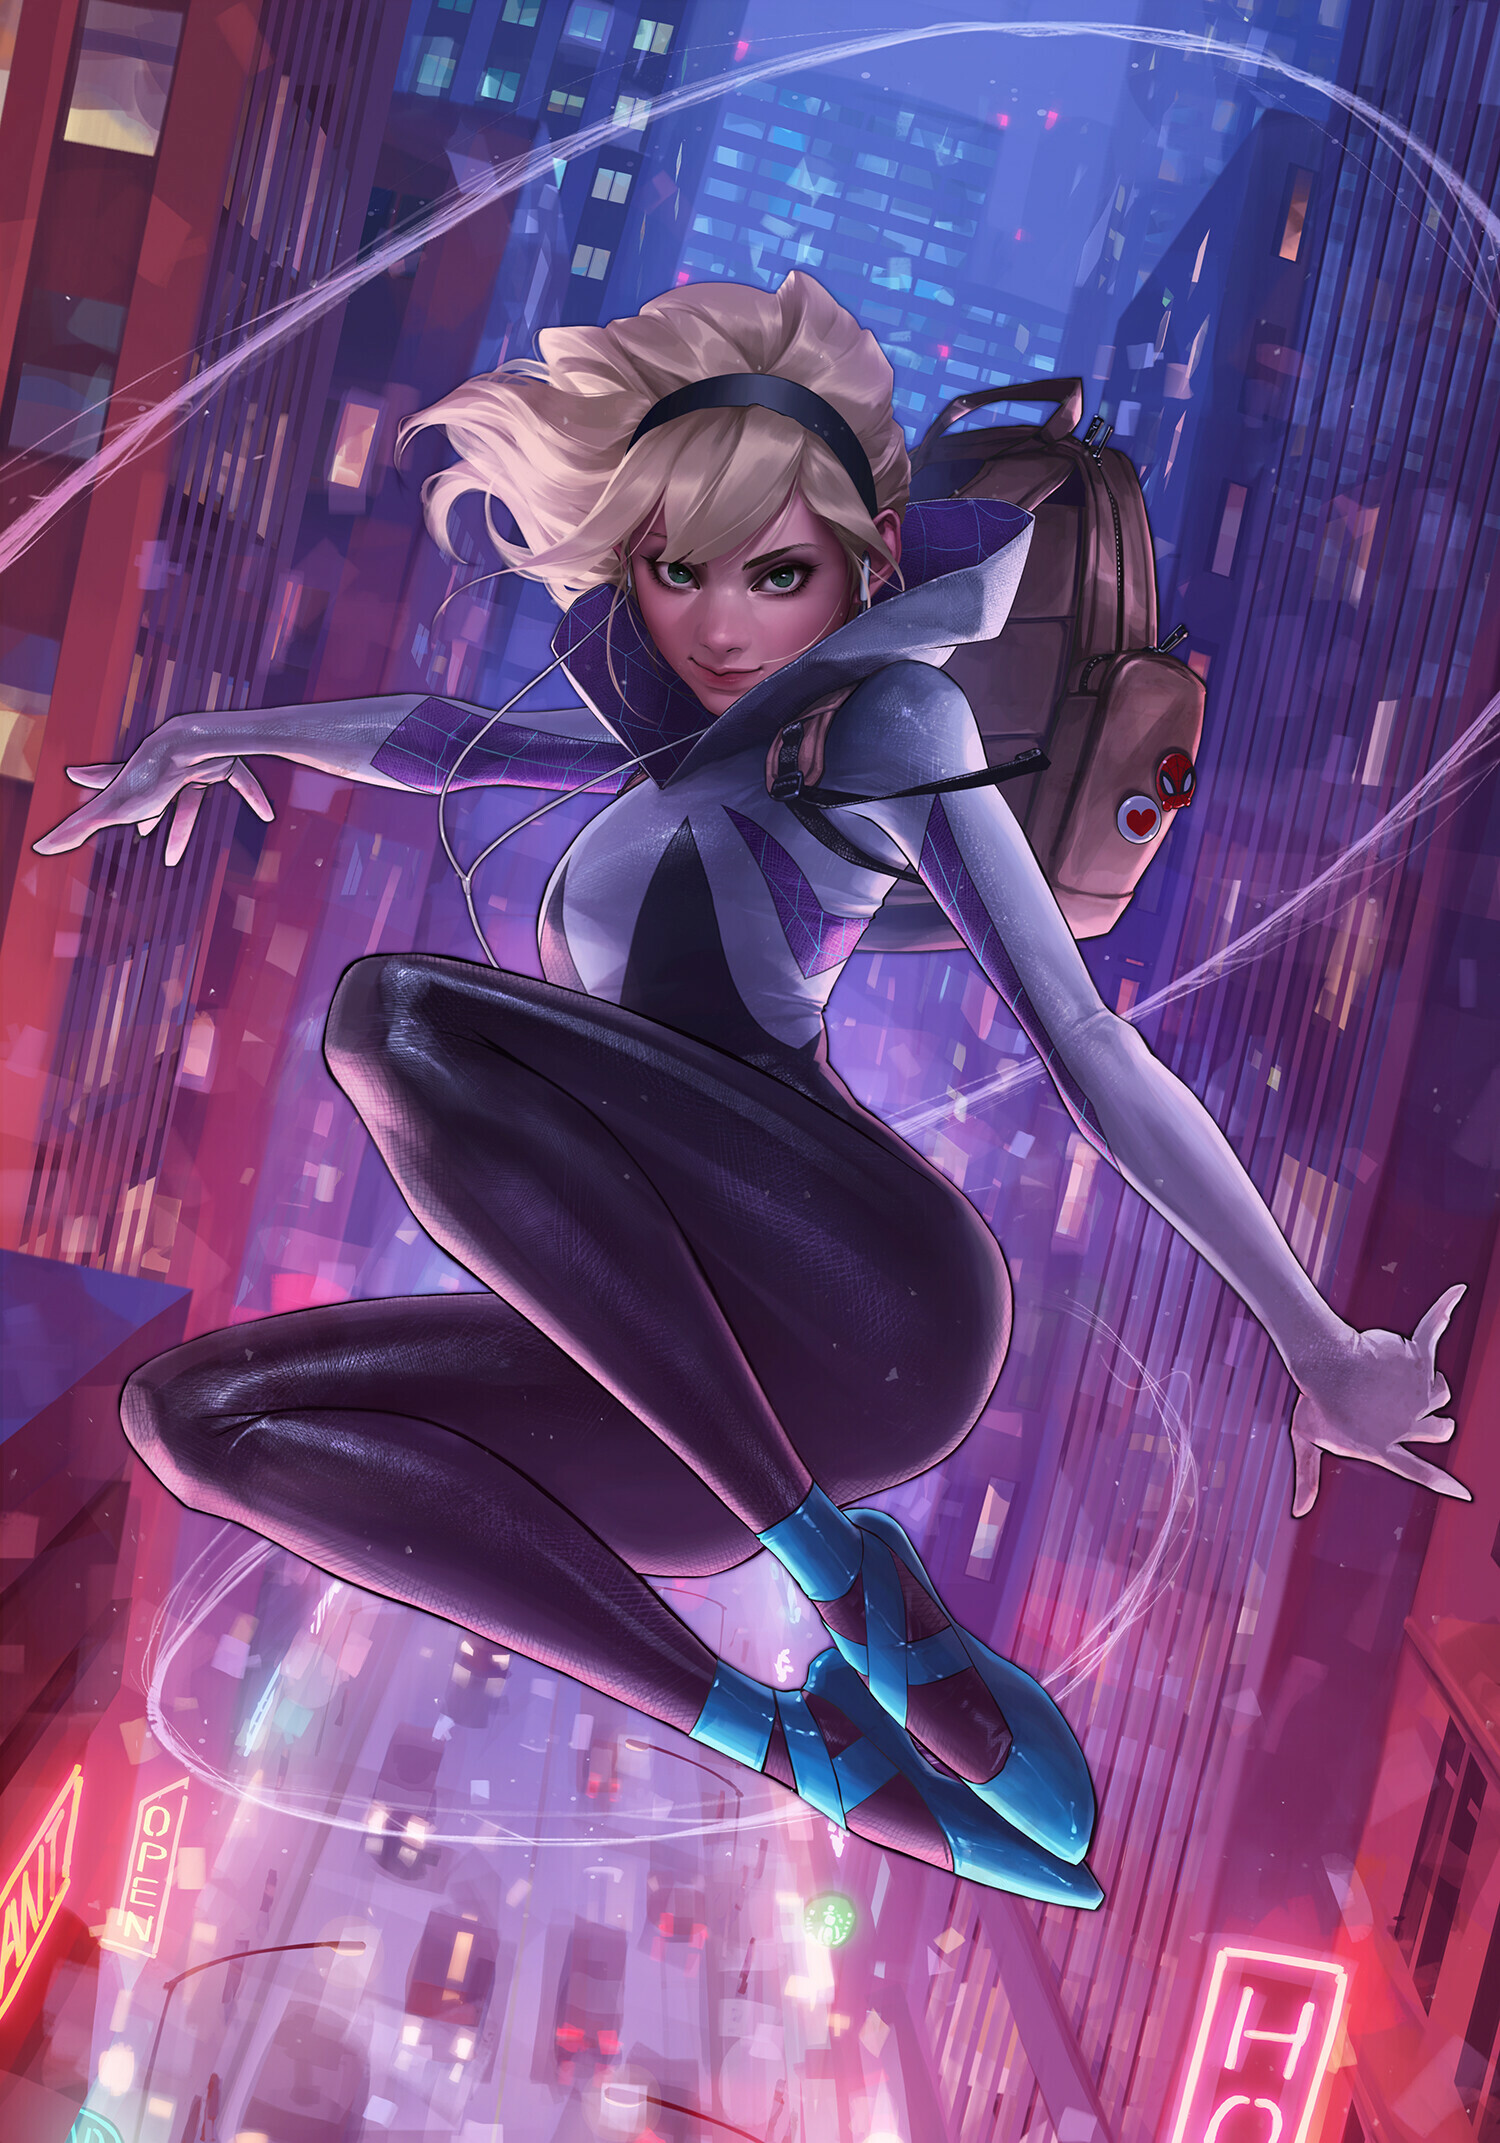 Gwen Stacy: Was bitten by a radioactive spider instead of Peter Parker and became Spider-Woman. 1500x2150 HD Background.